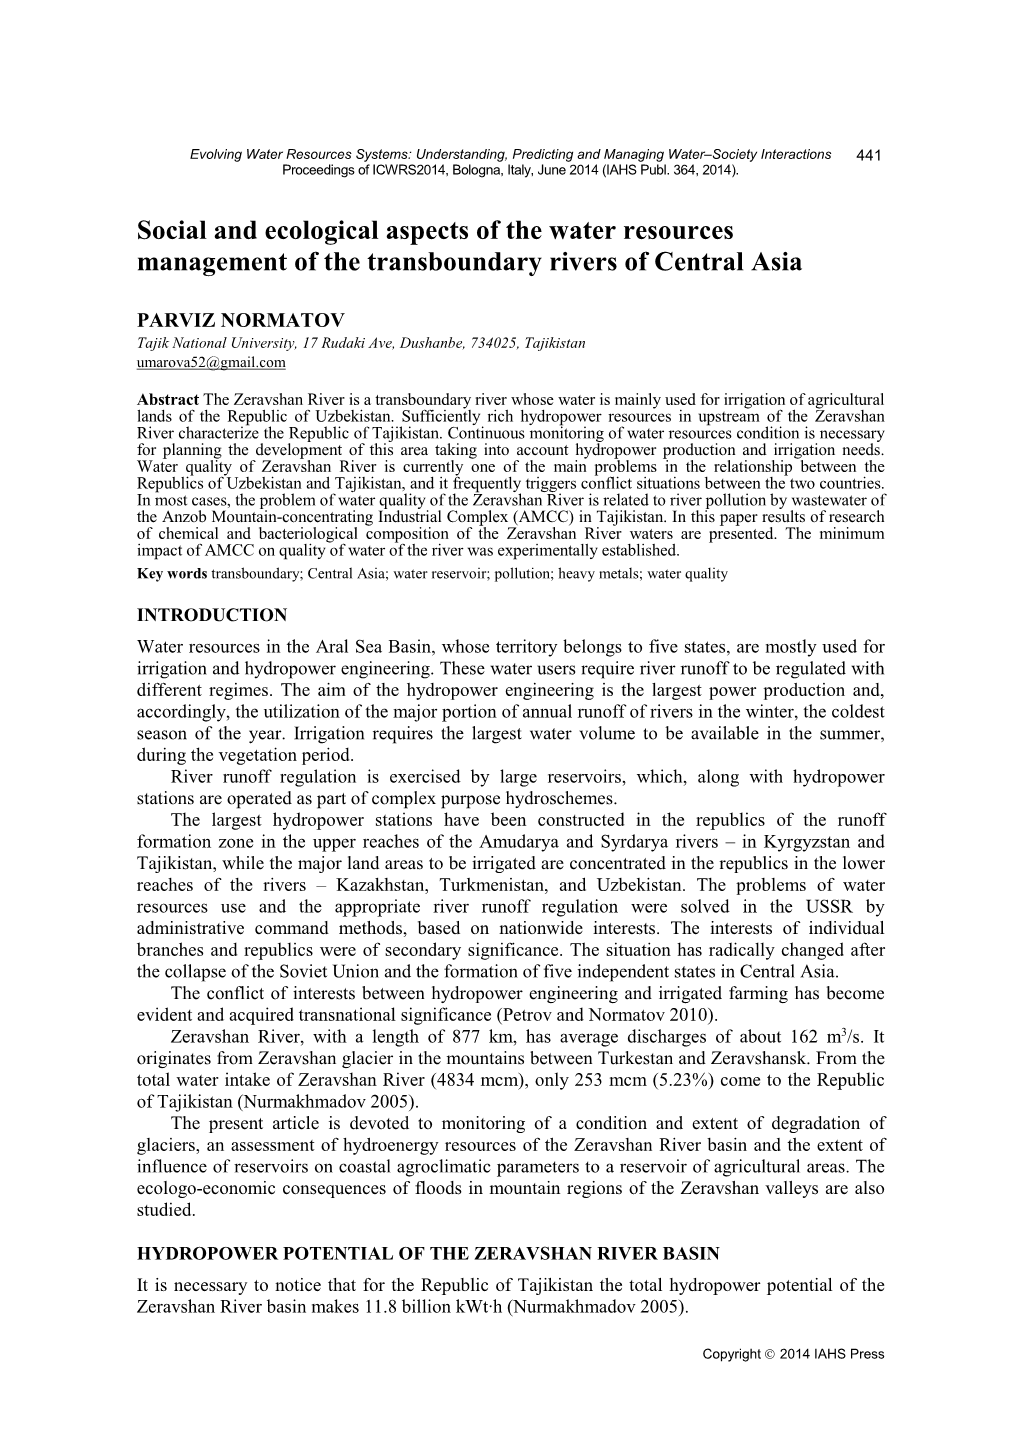 Social and Ecological Aspects of the Water Resources Management of the Transboundary Rivers of Central Asia